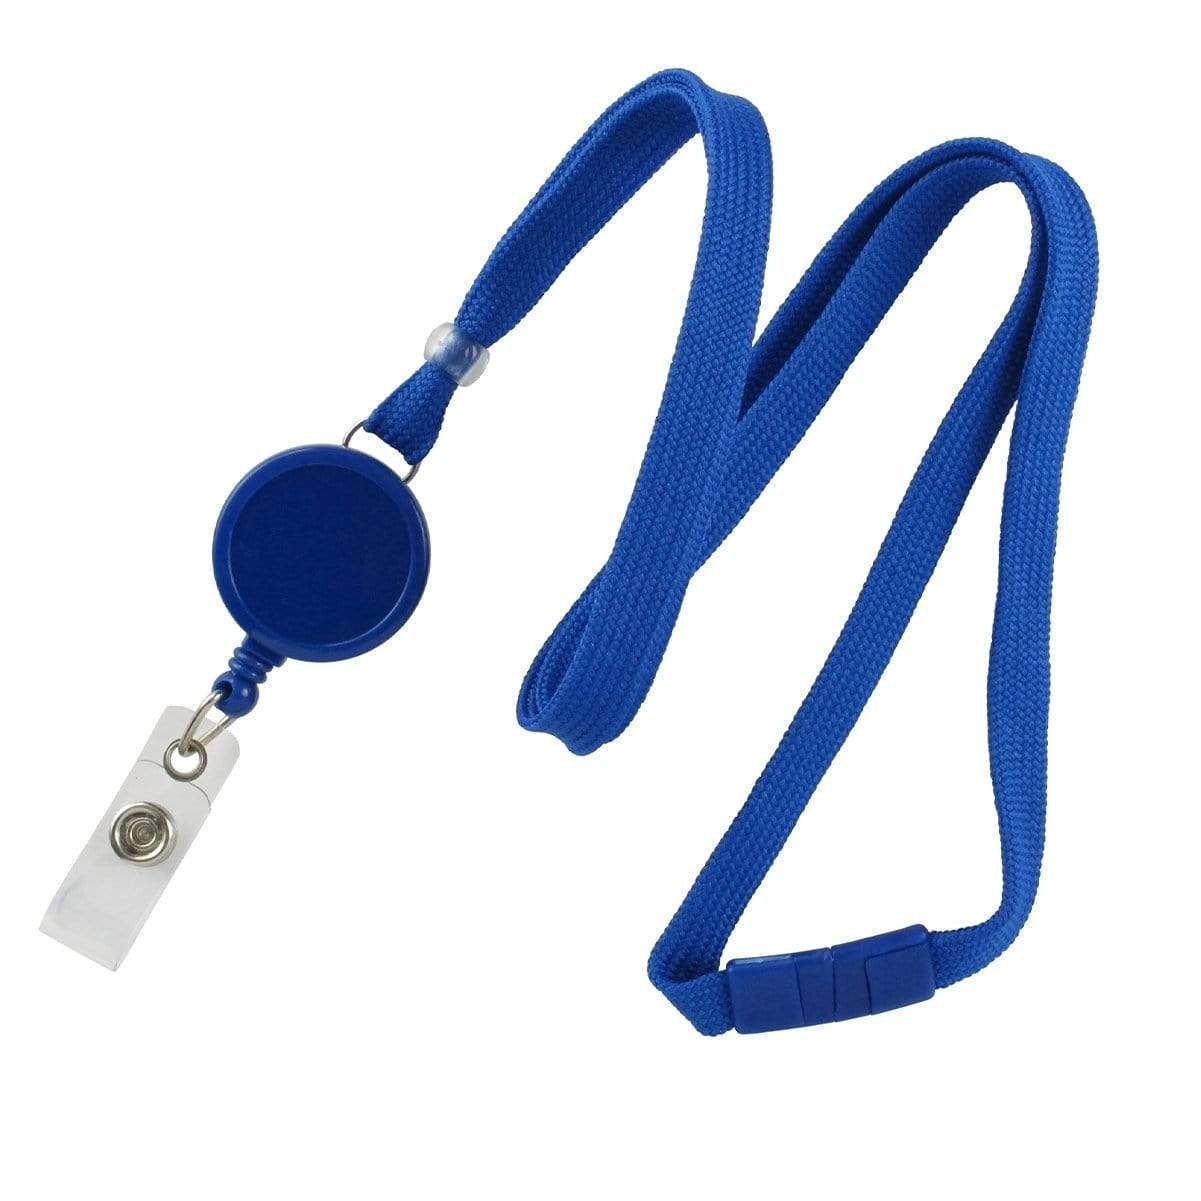 2 Pack Lanyard with ID Badge Holder Blue Red Lanyards for id Card Holder  Neck Office Lanyards for id Badges Name Tag Card Holders 